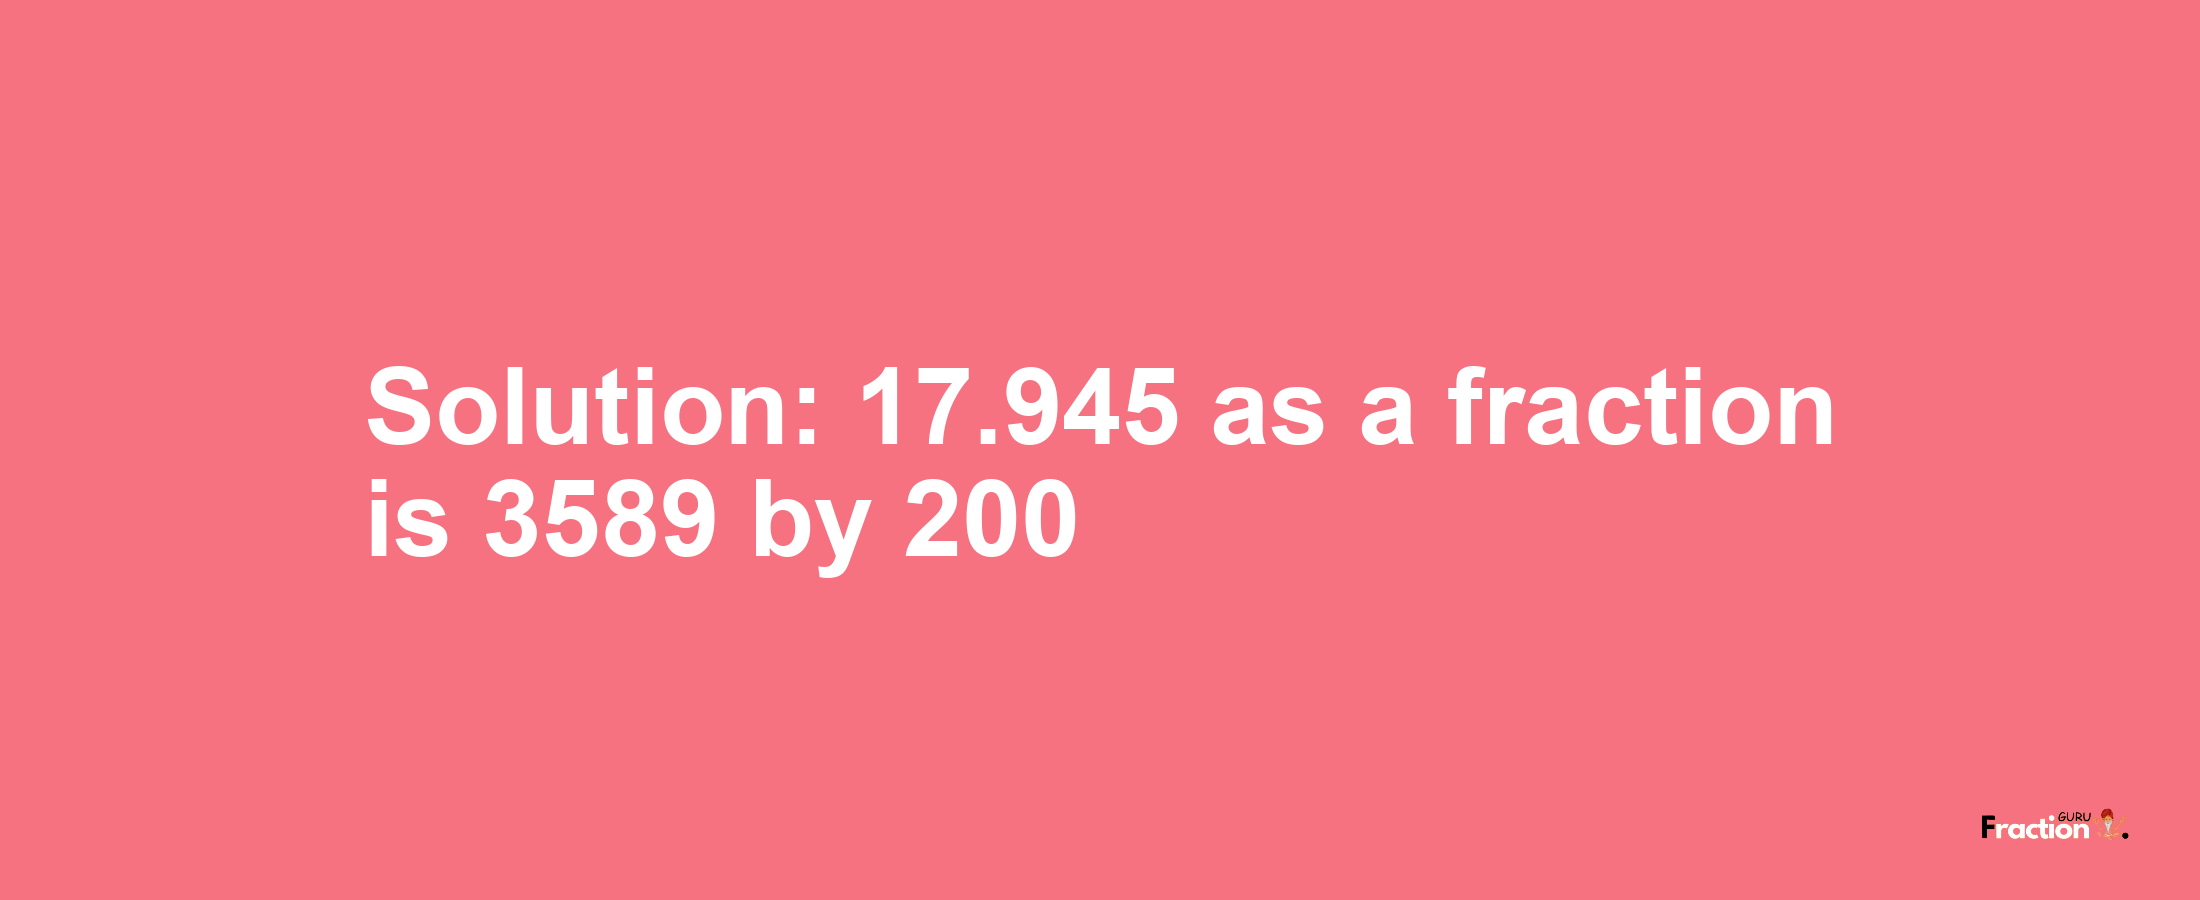 Solution:17.945 as a fraction is 3589/200